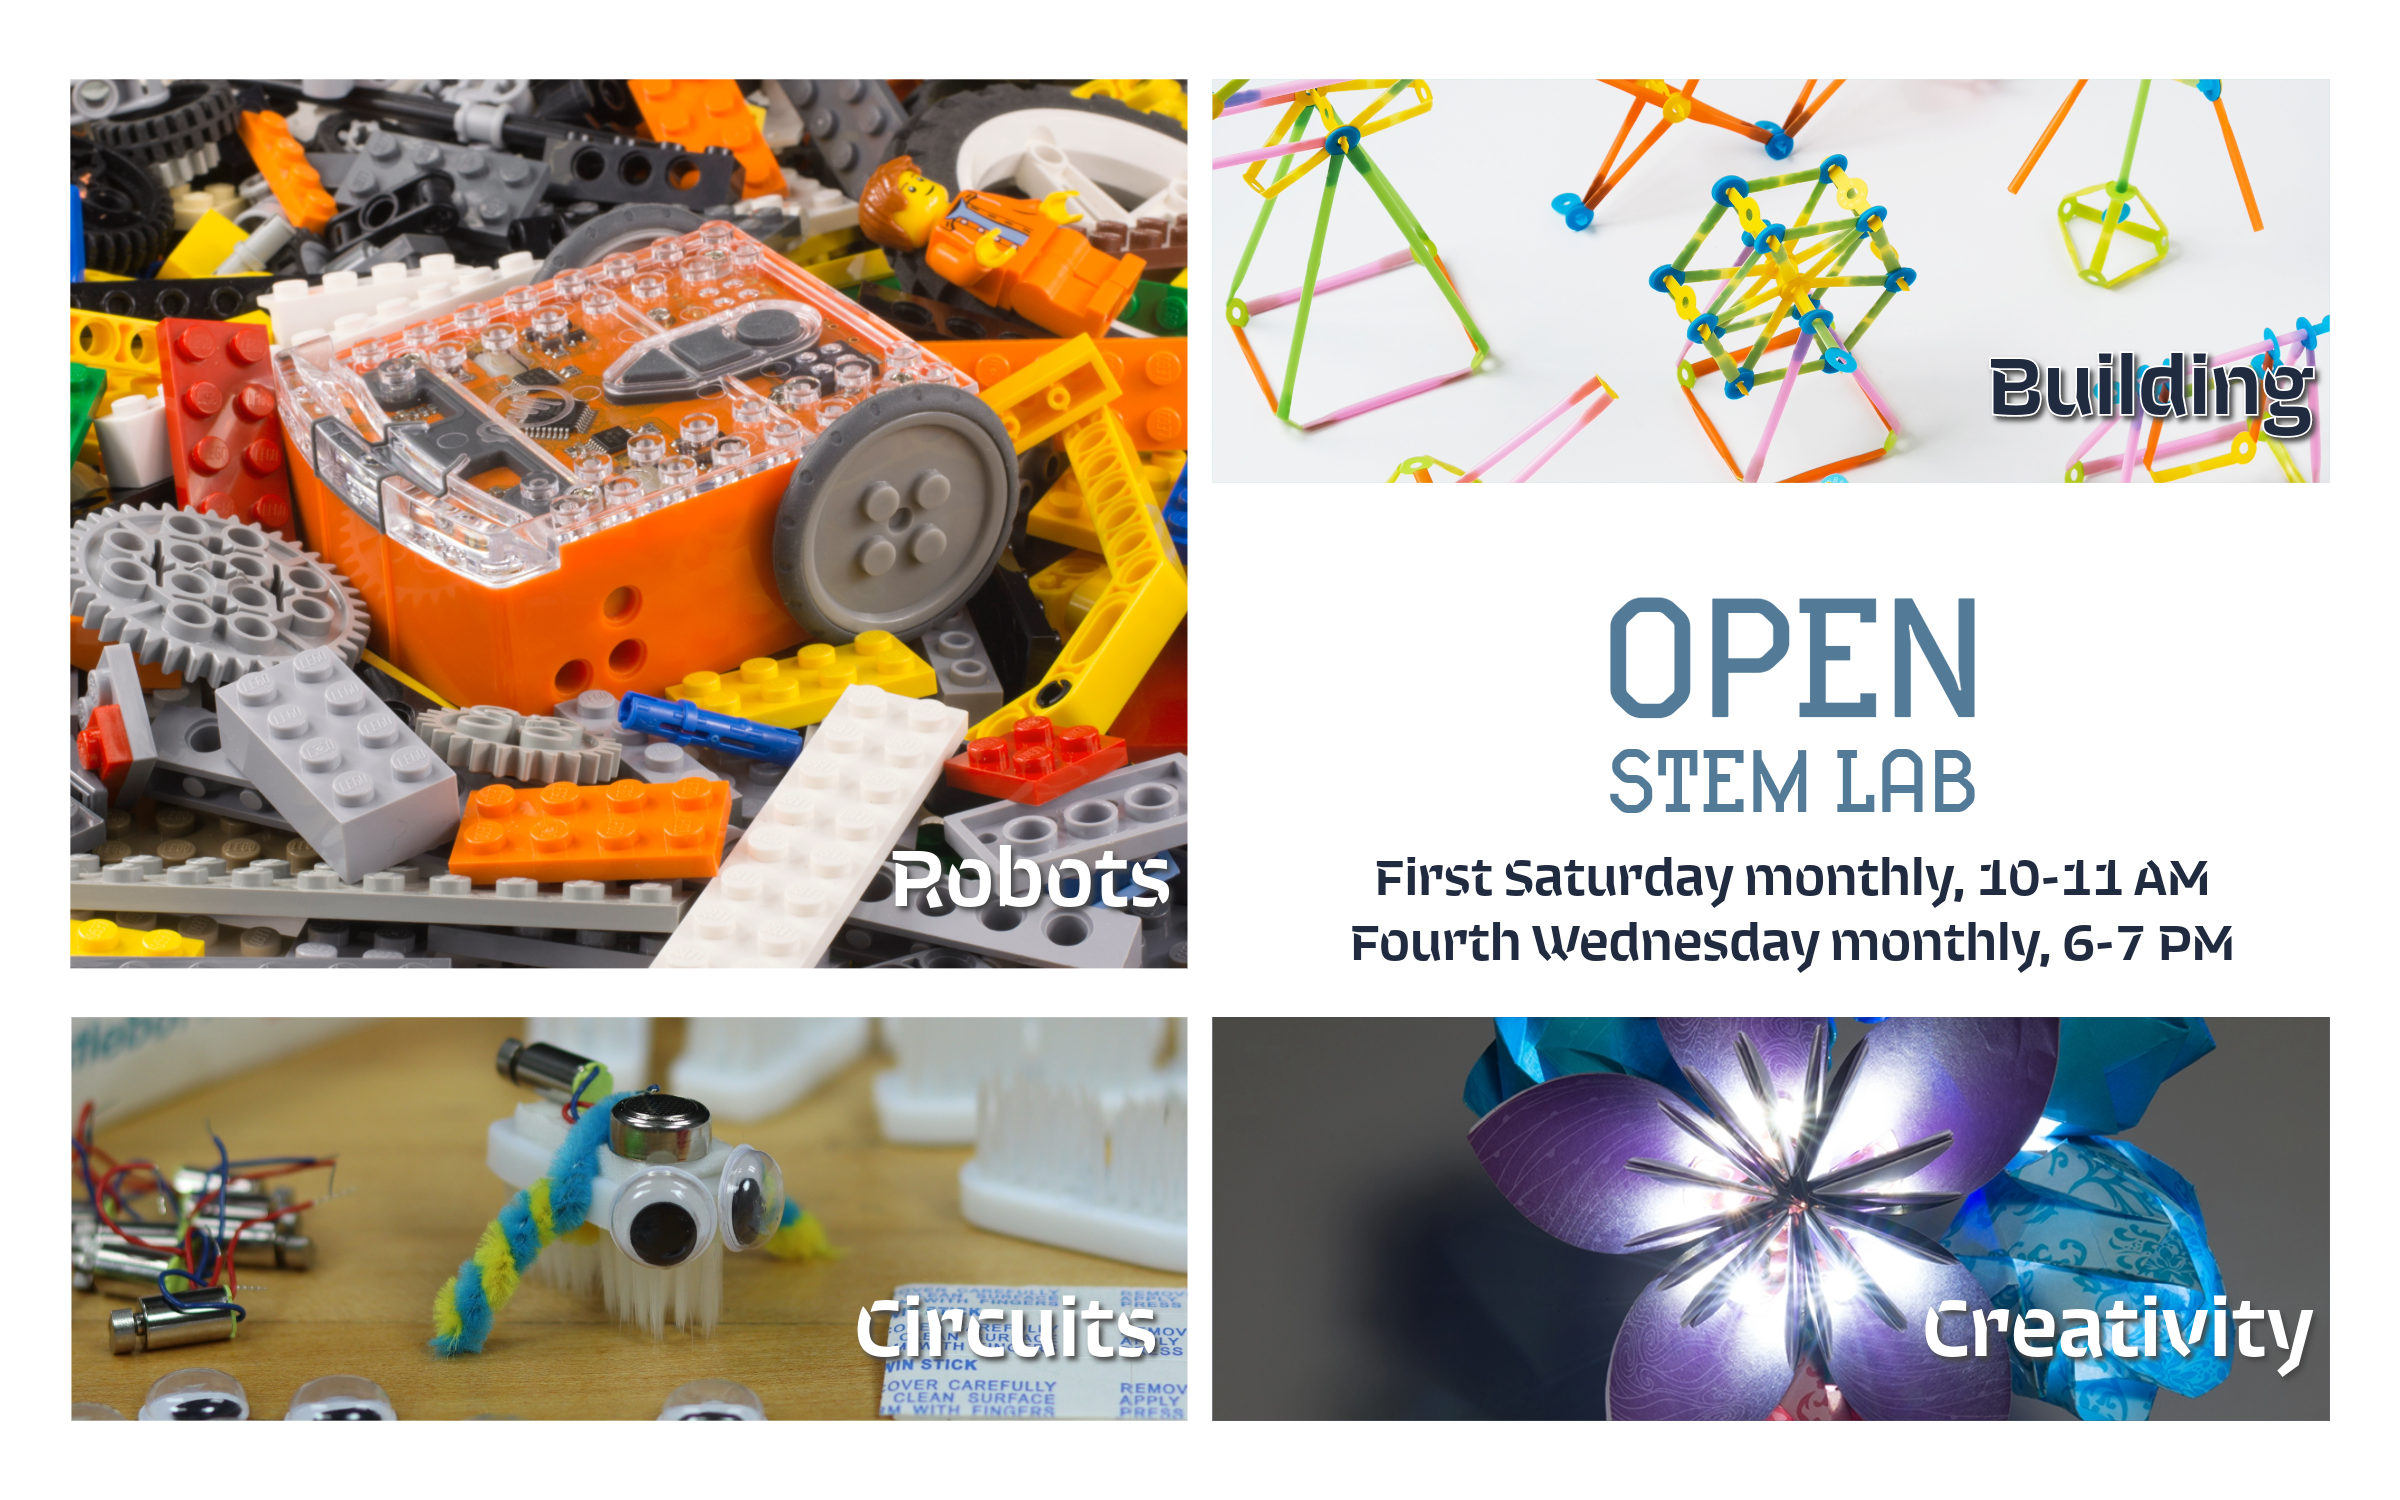 Open STEM Lab promo graphic, featuring an Edison Microbric robot kit.